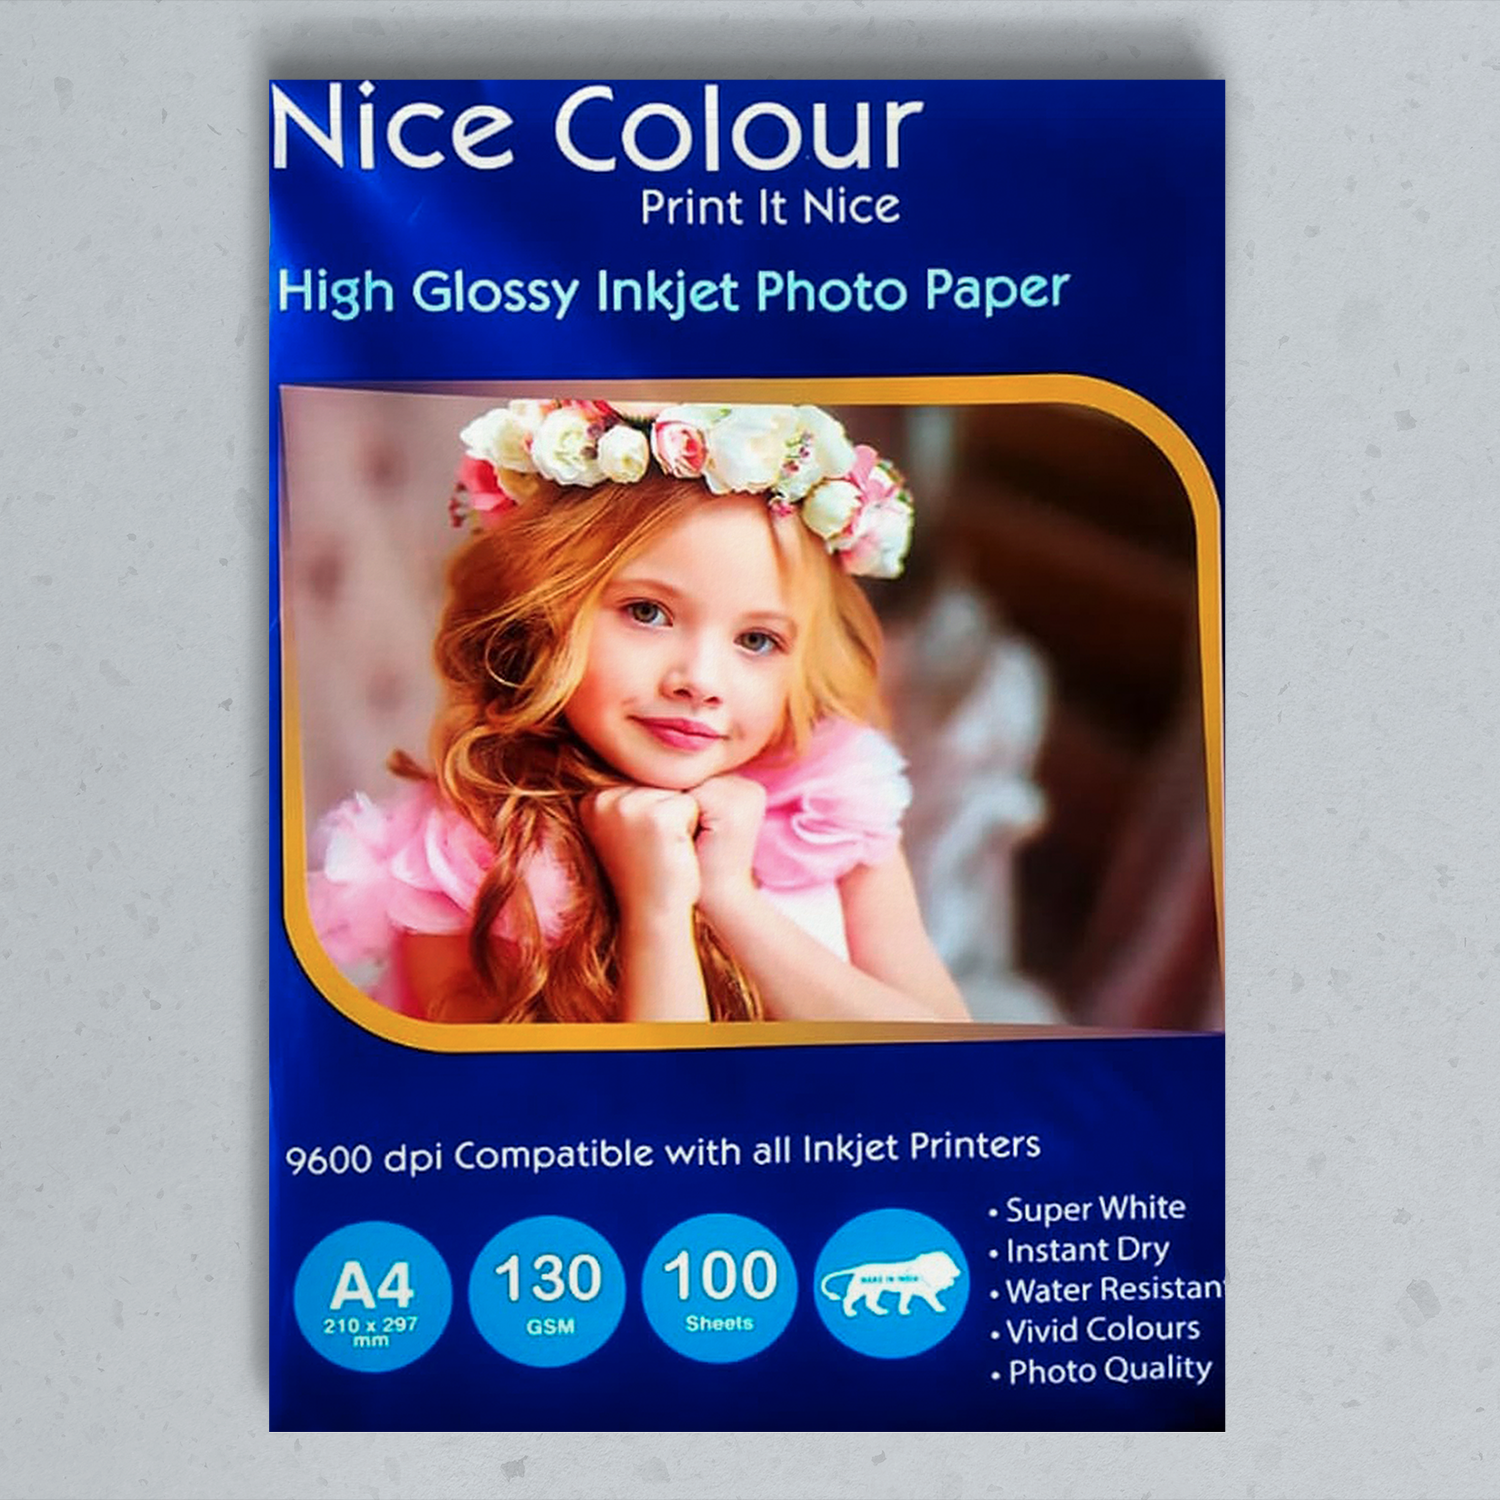 A4 High Glossy Inkjet Photo Paper 130gsm 100 Sheets